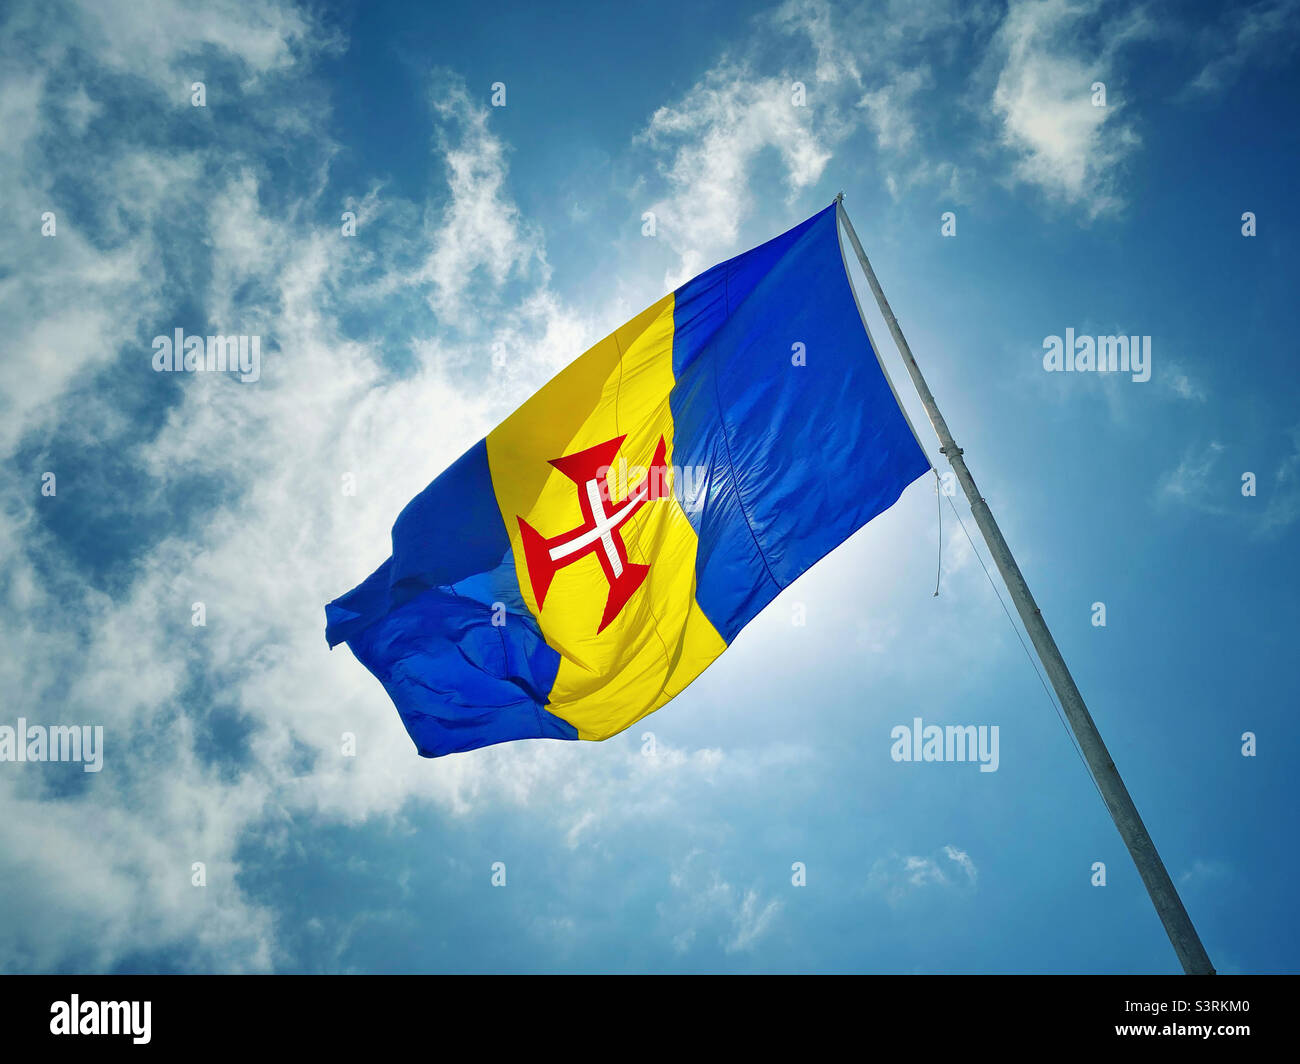 The flag of Madeira. Madeira is an island in the Atlantic Ocean and an Autonomous Region of Portugal. Blue=Environment. Yellow=Wealth & Climate. The Red Cross of Christ. Photo ©️ COLIN HOSKINS. Stock Photo